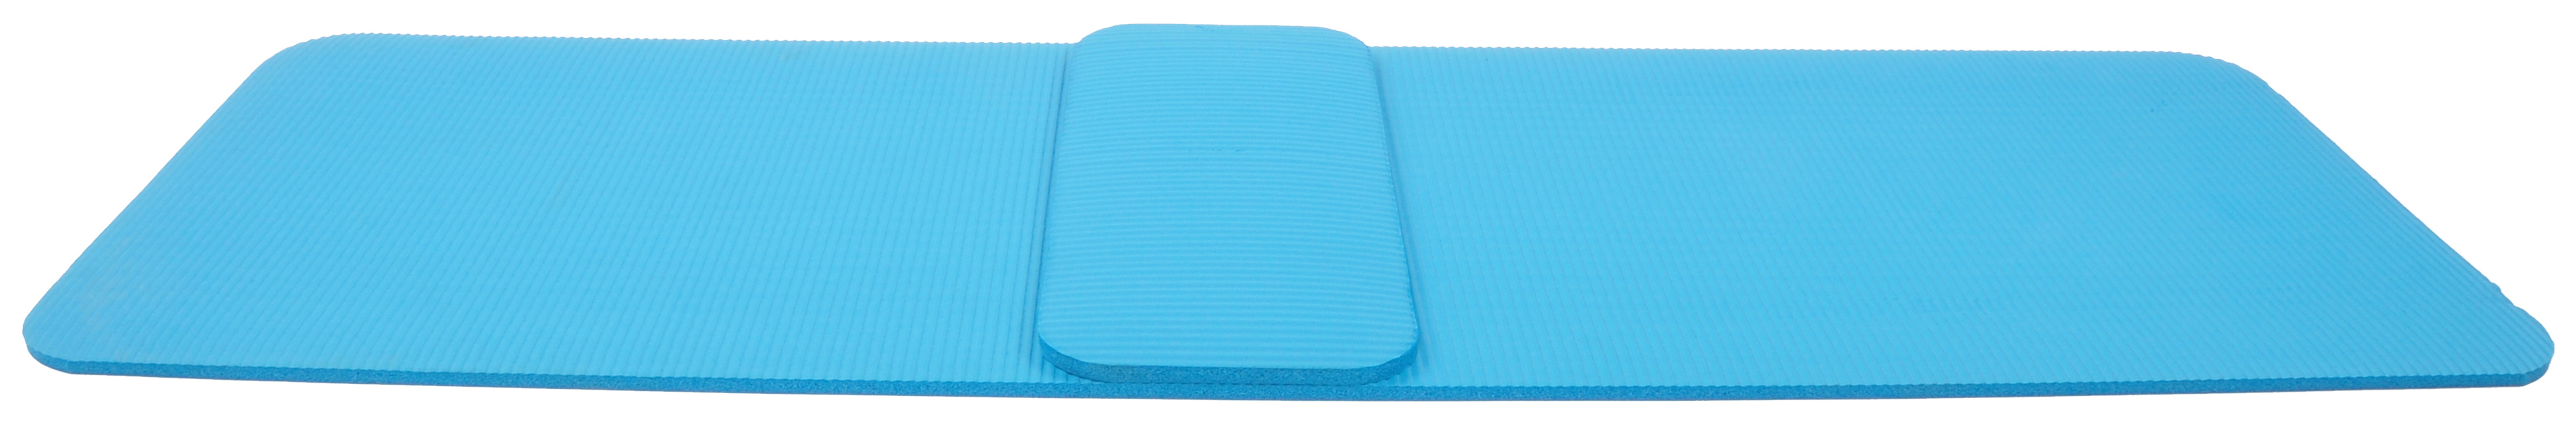 BalanceFrom + All-Purpose 1/2-In. Extra Thick, High Density, Anti-Tear Exercise Yoga Mat and Knee Pad with Carrying Strap - image 4 of 6